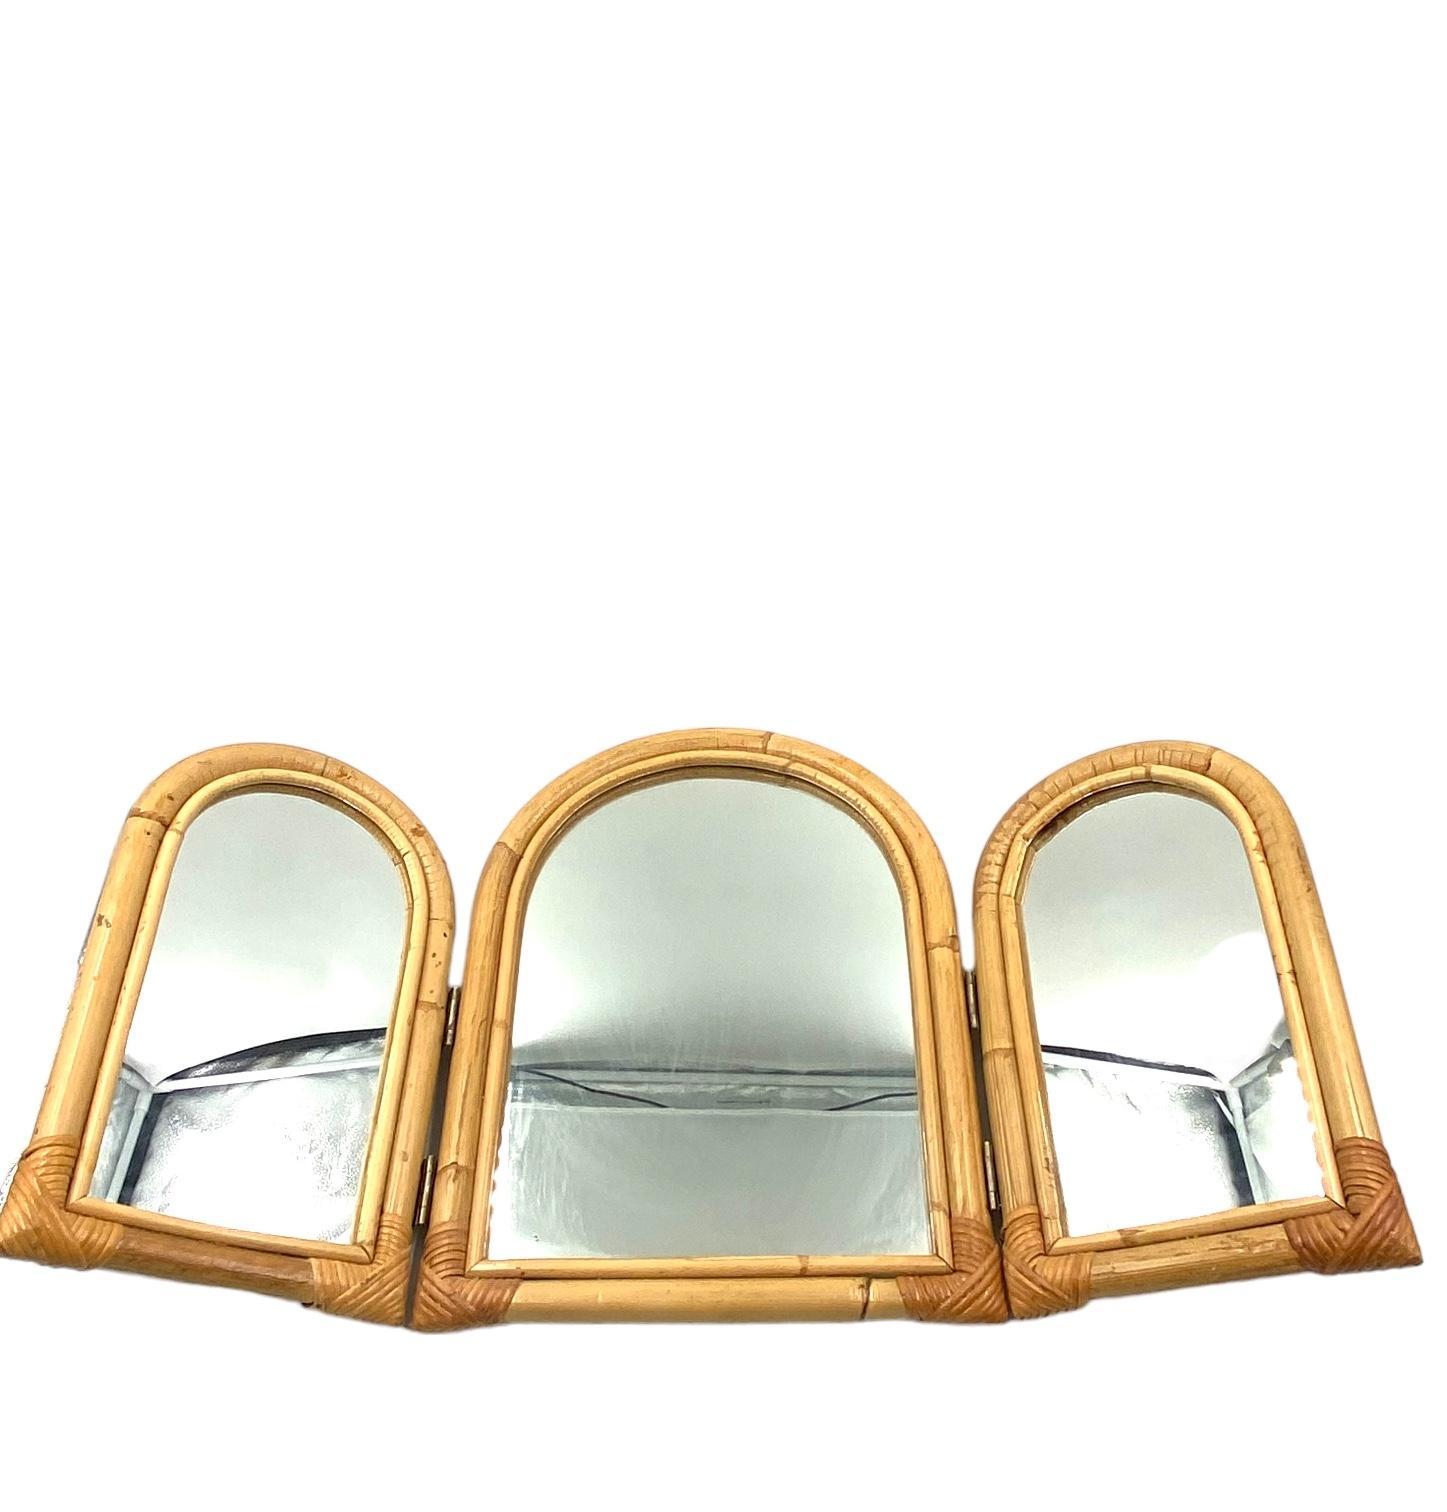 Hollywood Regency Bamboo three flaps table mirror / vanity, Italy 1960s For Sale